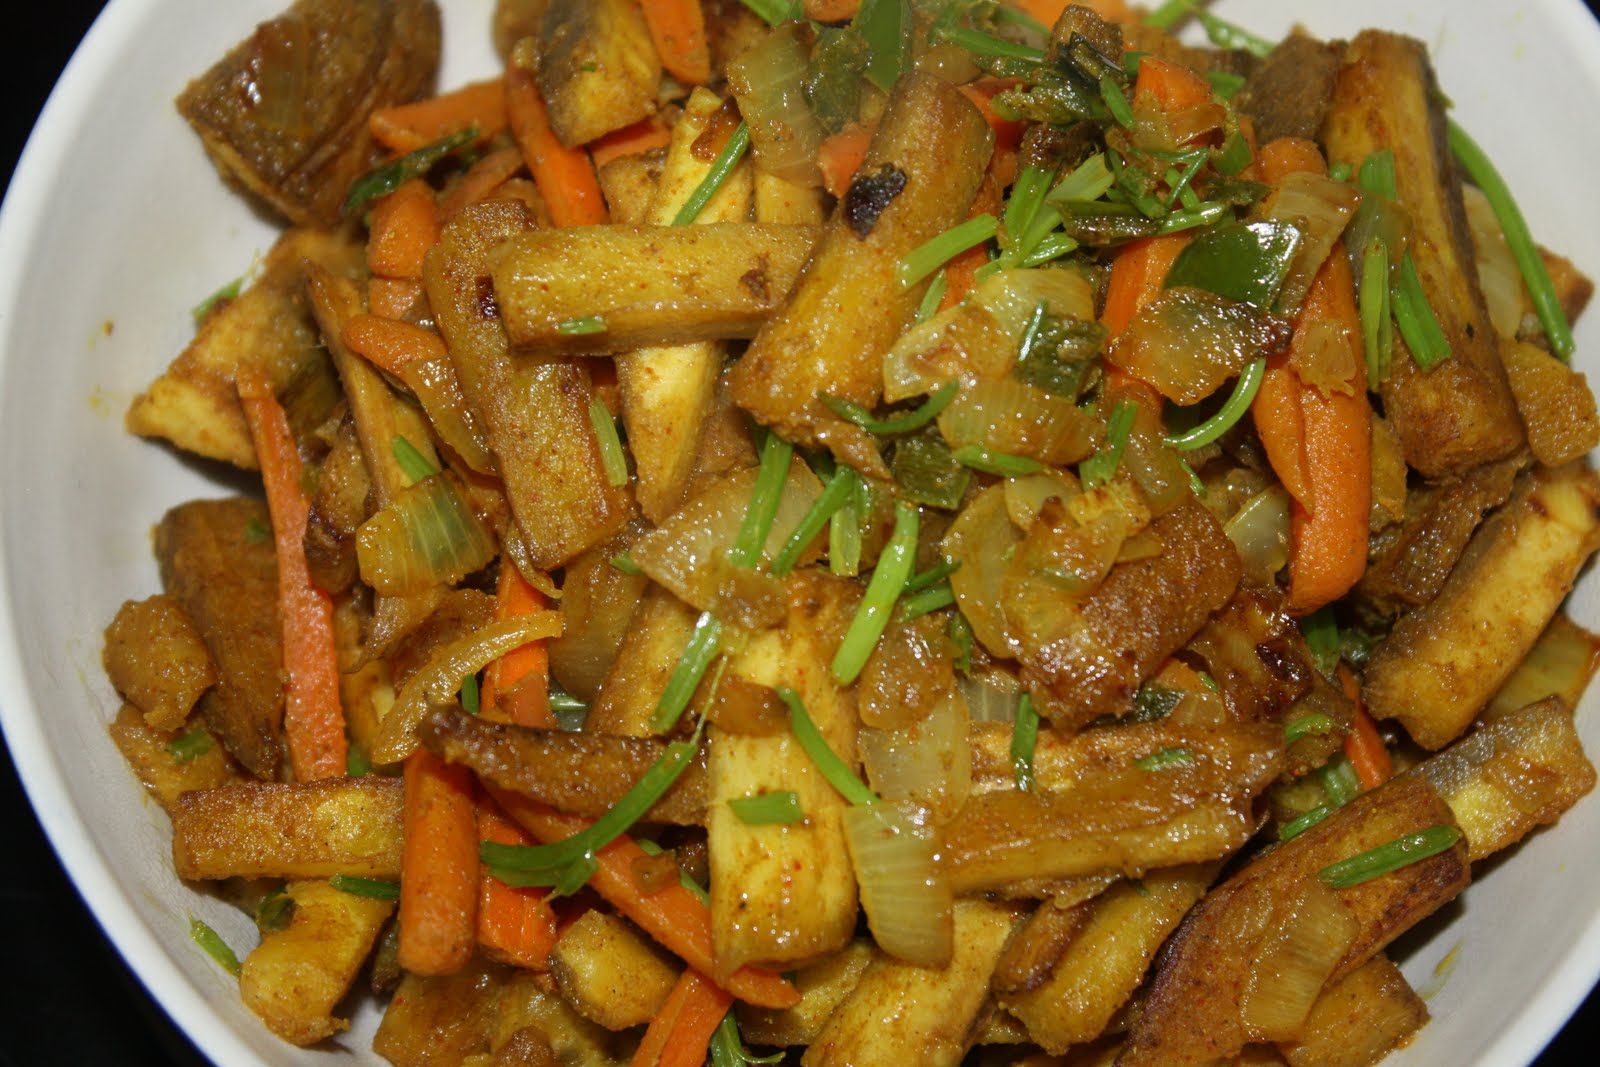 Recipes and Tips To Fight M.S.: Plantains Stir Fry